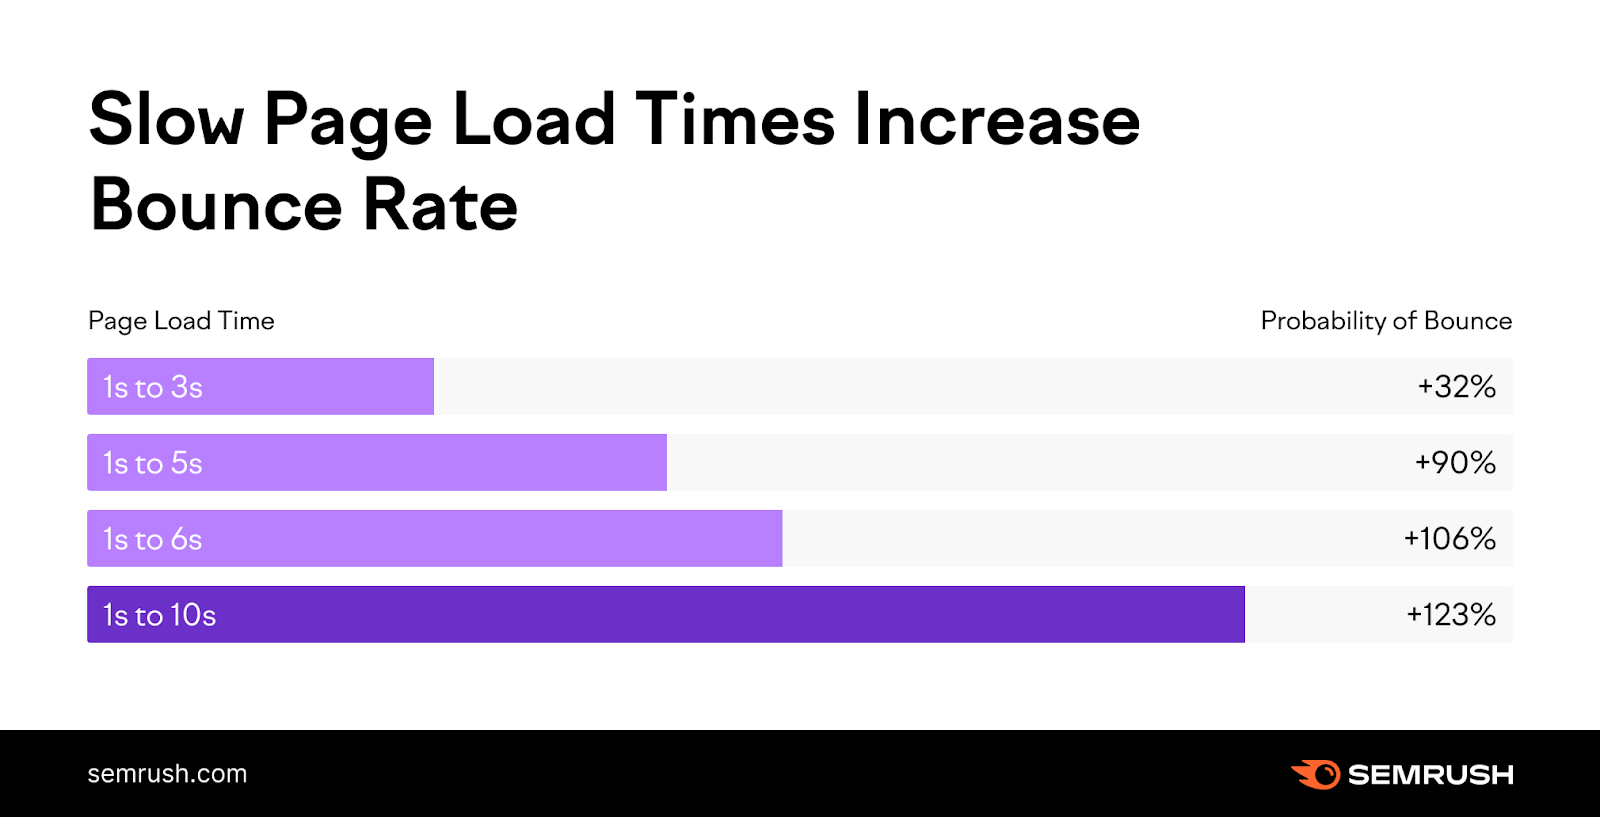 How slow page load times increase bounce rate